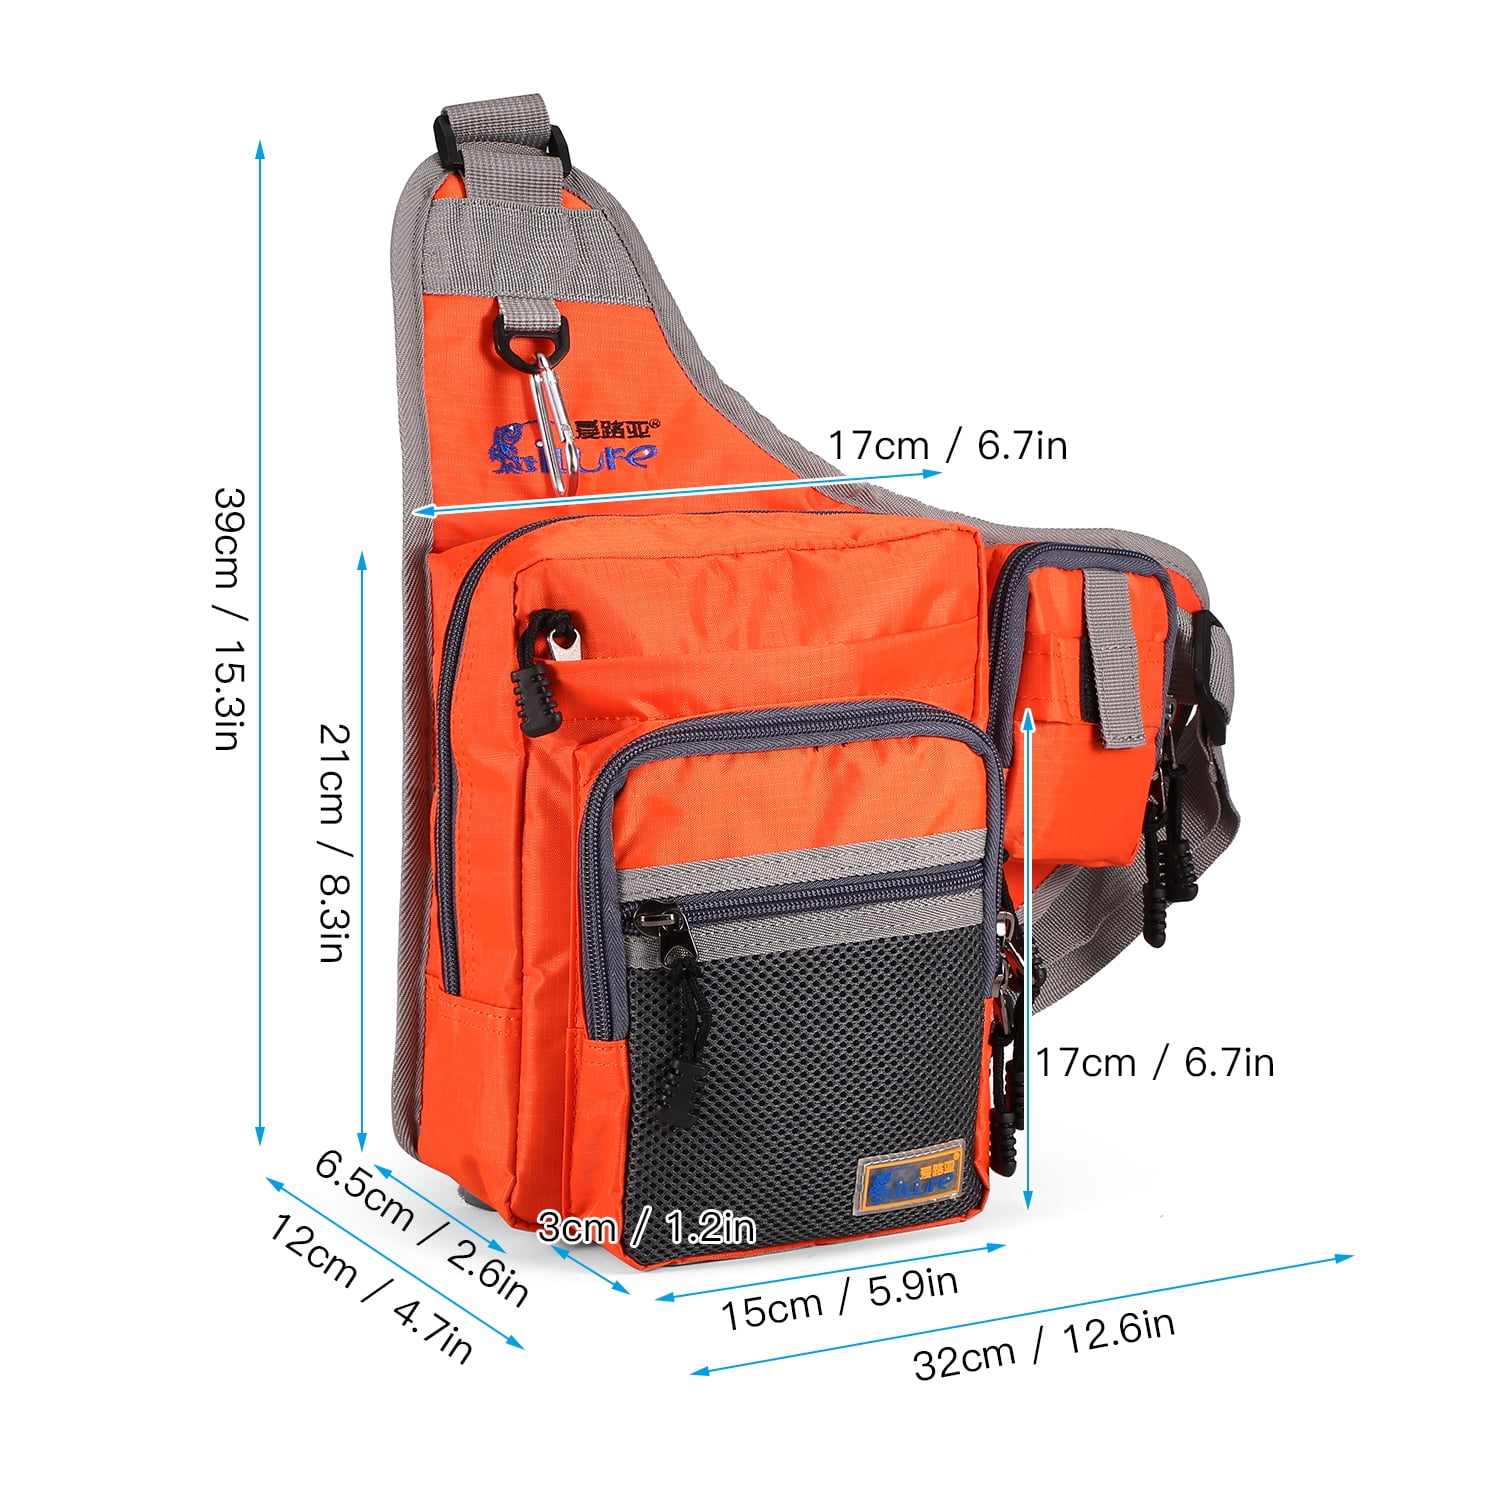 Multi-purpose Tactical Sling Pack Backpack Crossbody Shoulder Bag Daypack  for Outdoor Fishing Hiking Climbing – the best products in the Joom Geek  online store